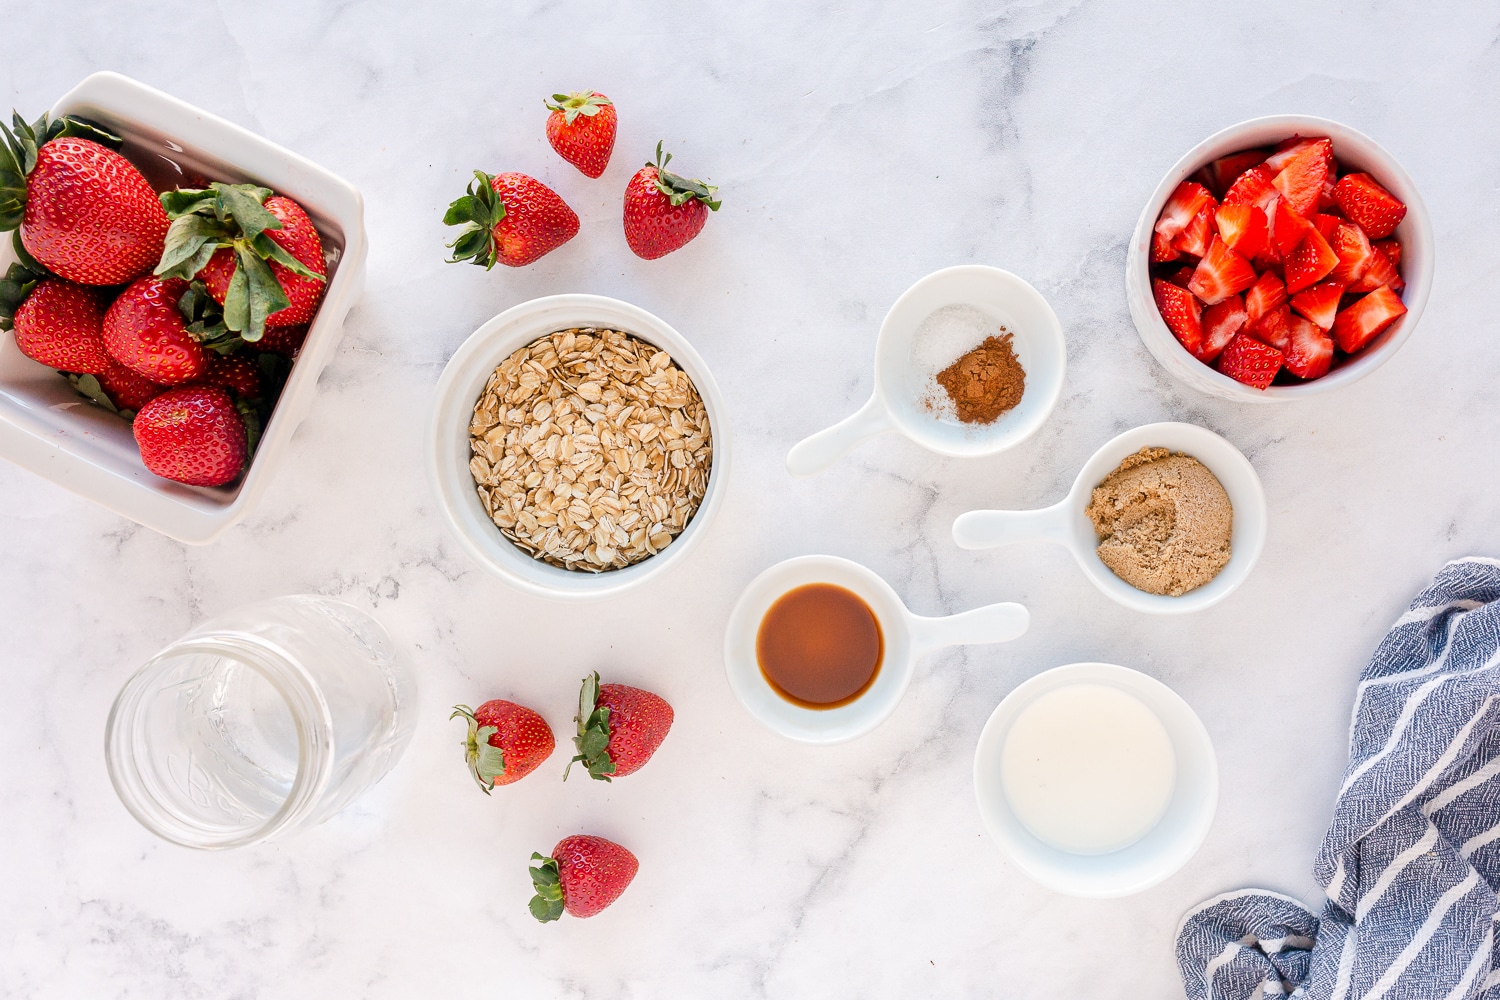 supplies needed for strawberry oatmeal in dishes on counter